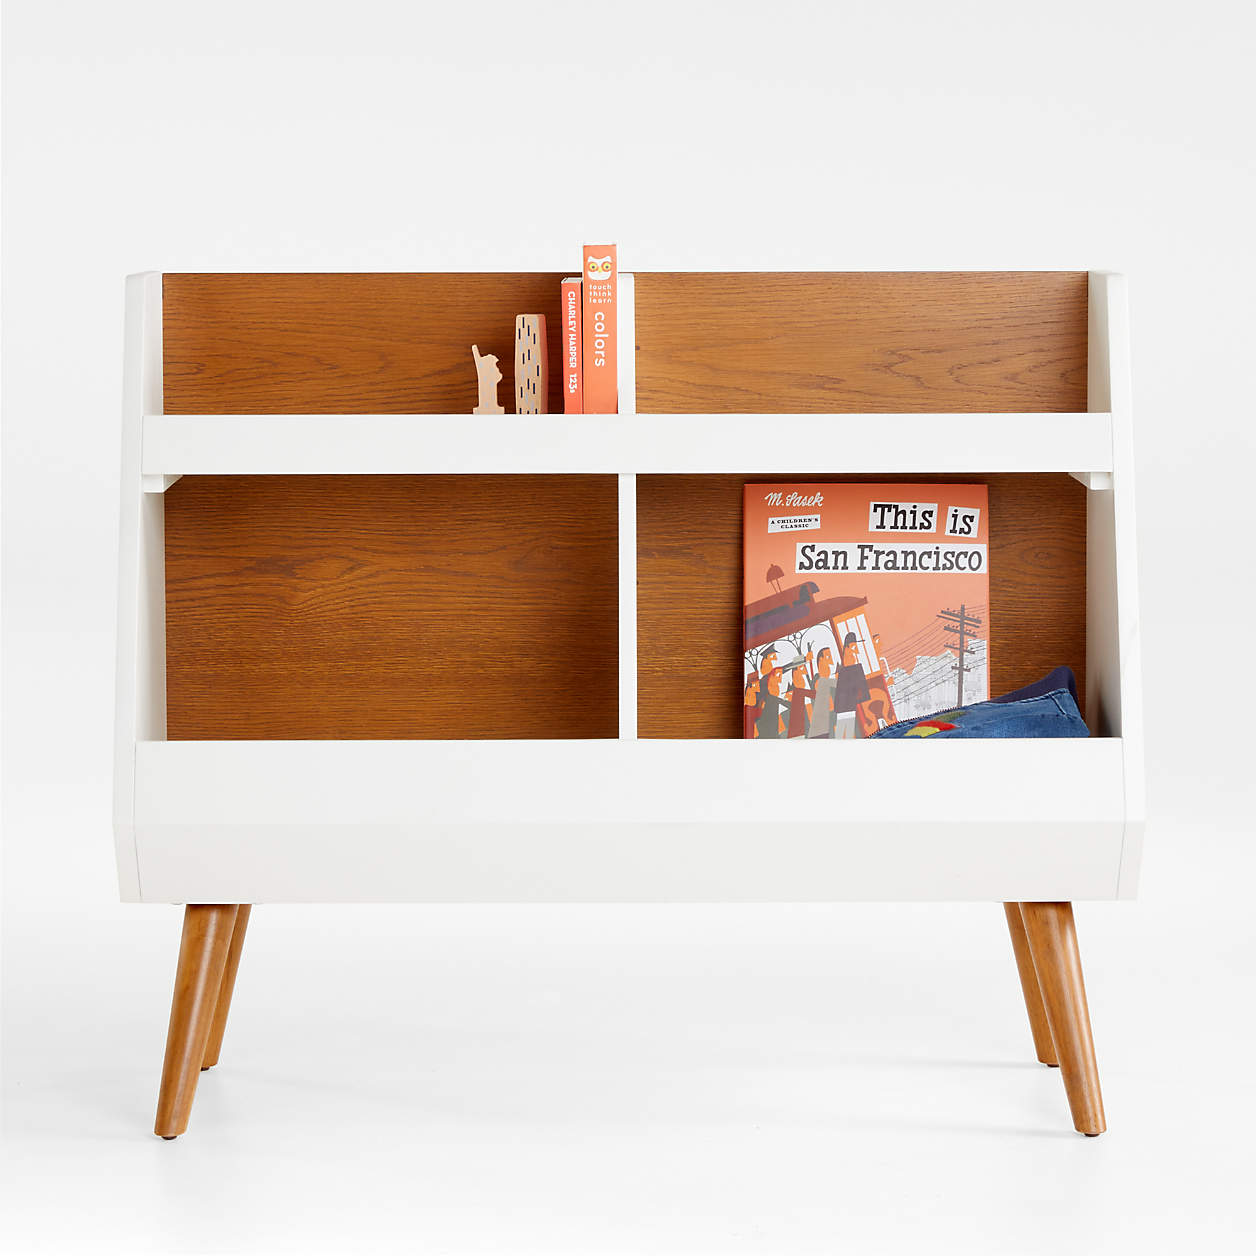 Cubby Bookcase